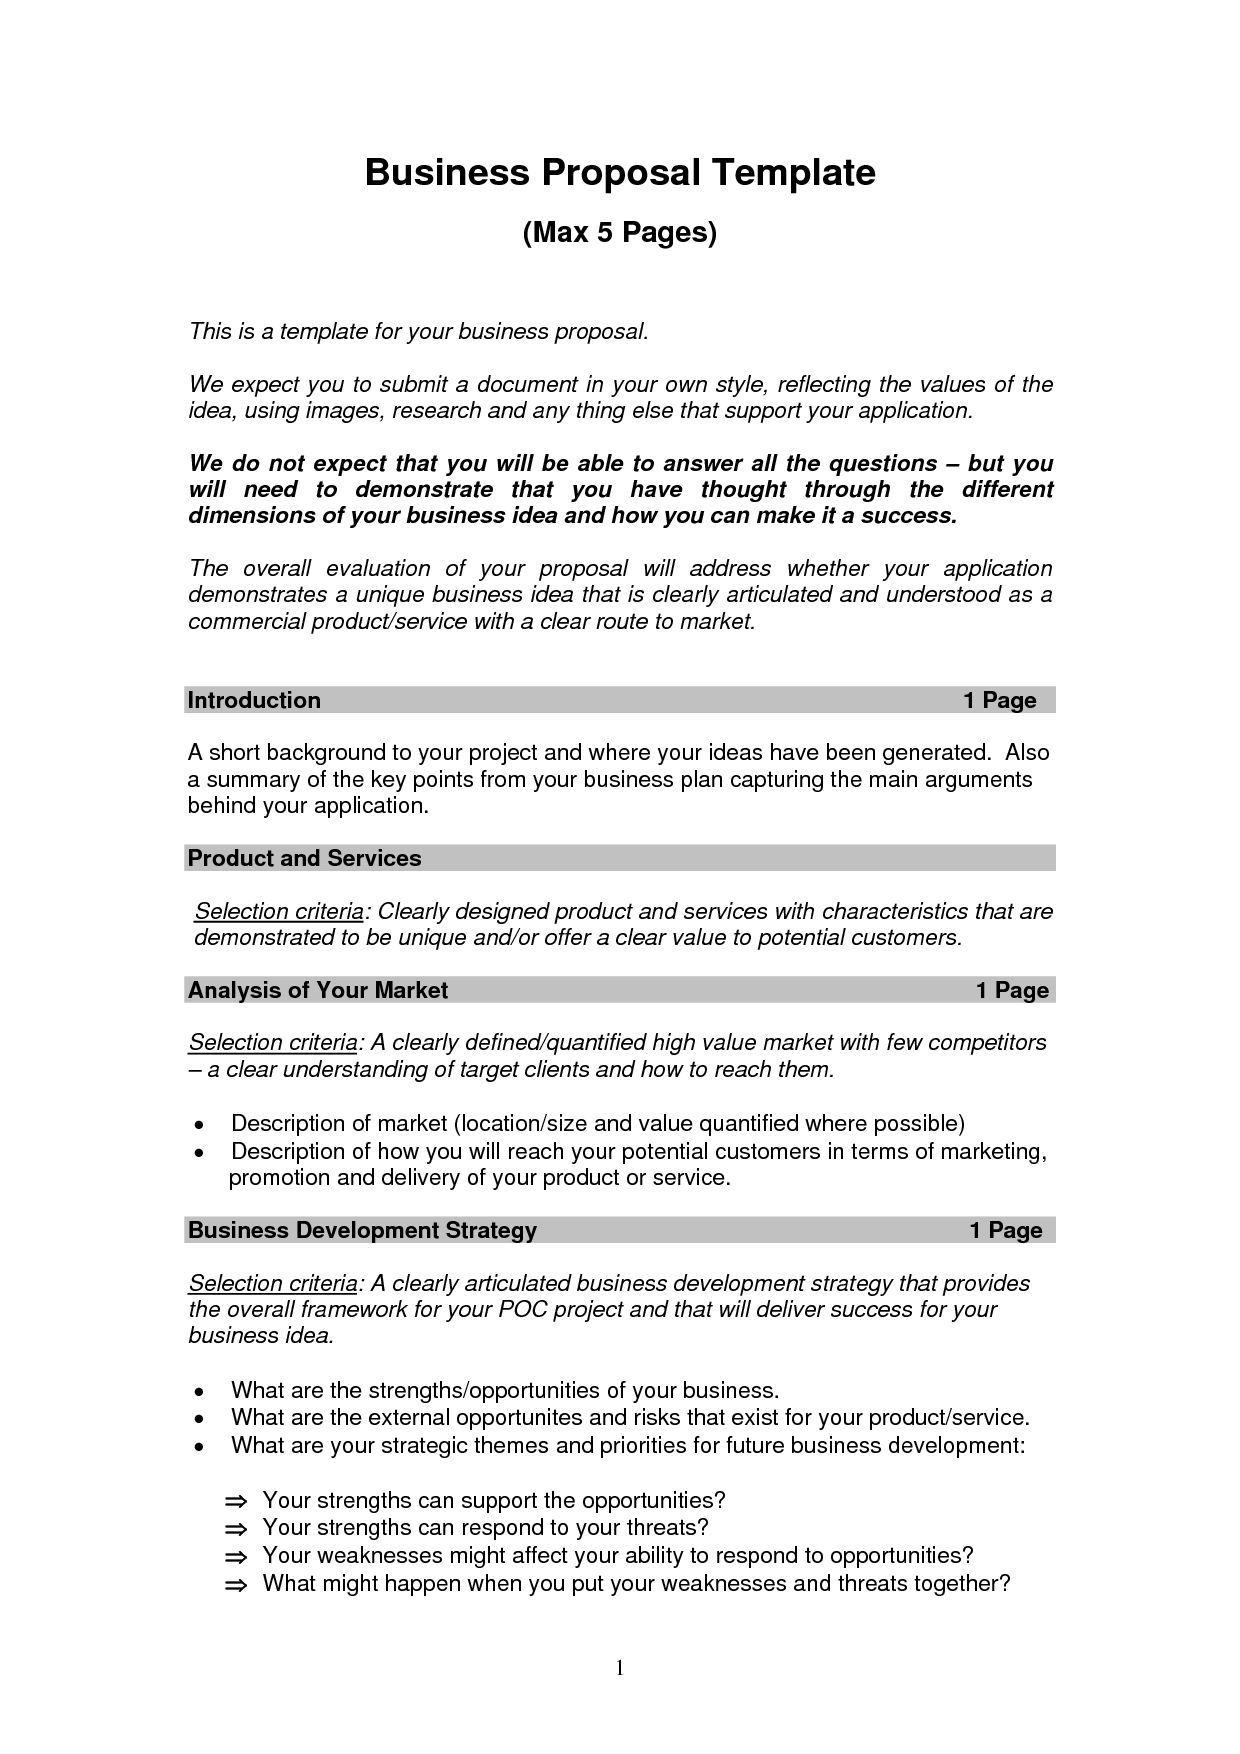 Business Proposal Templates Examples | business proposal sample 